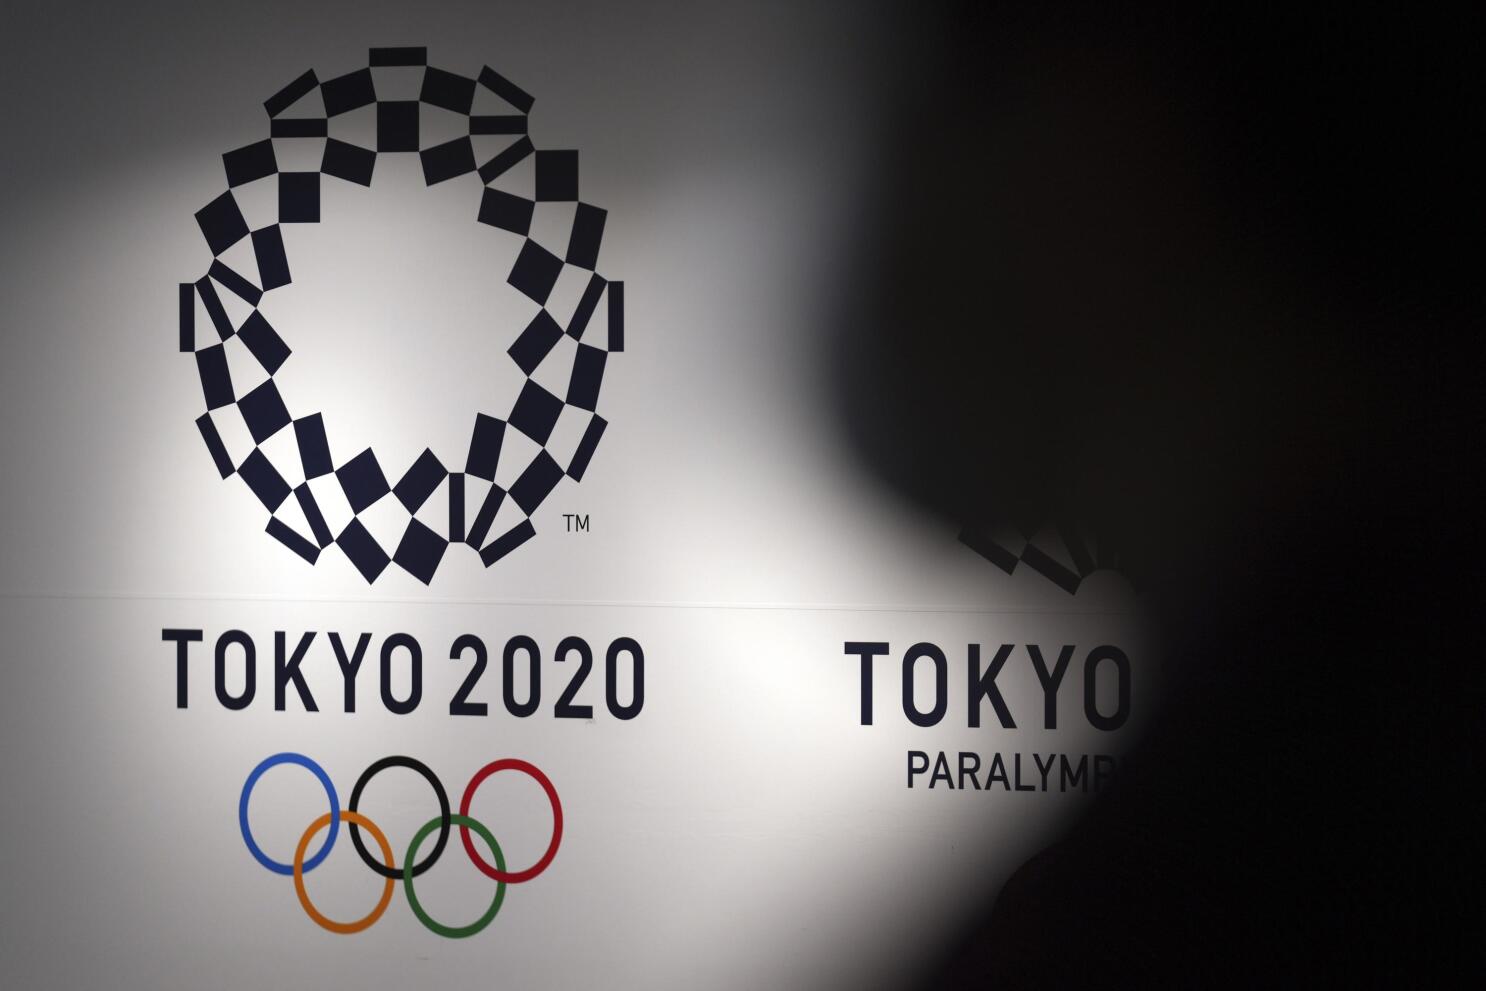 Tokyo Olympic bribery trial opens; accused accepts guilt